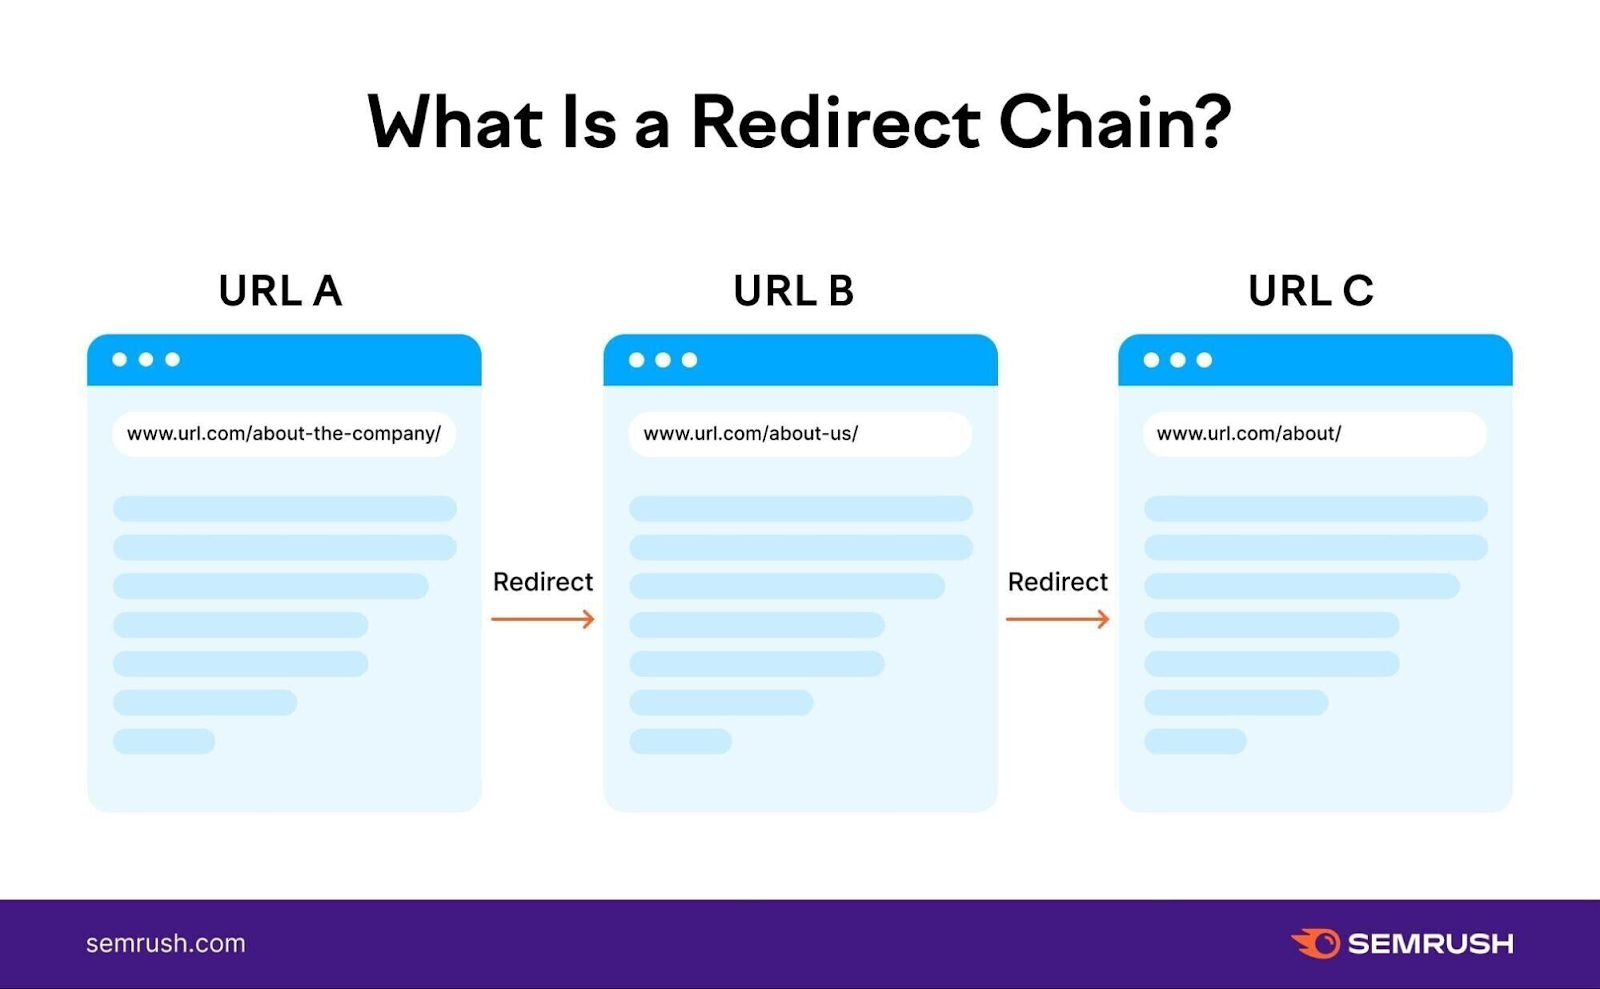 "What Is a Redirect Chain" infographic